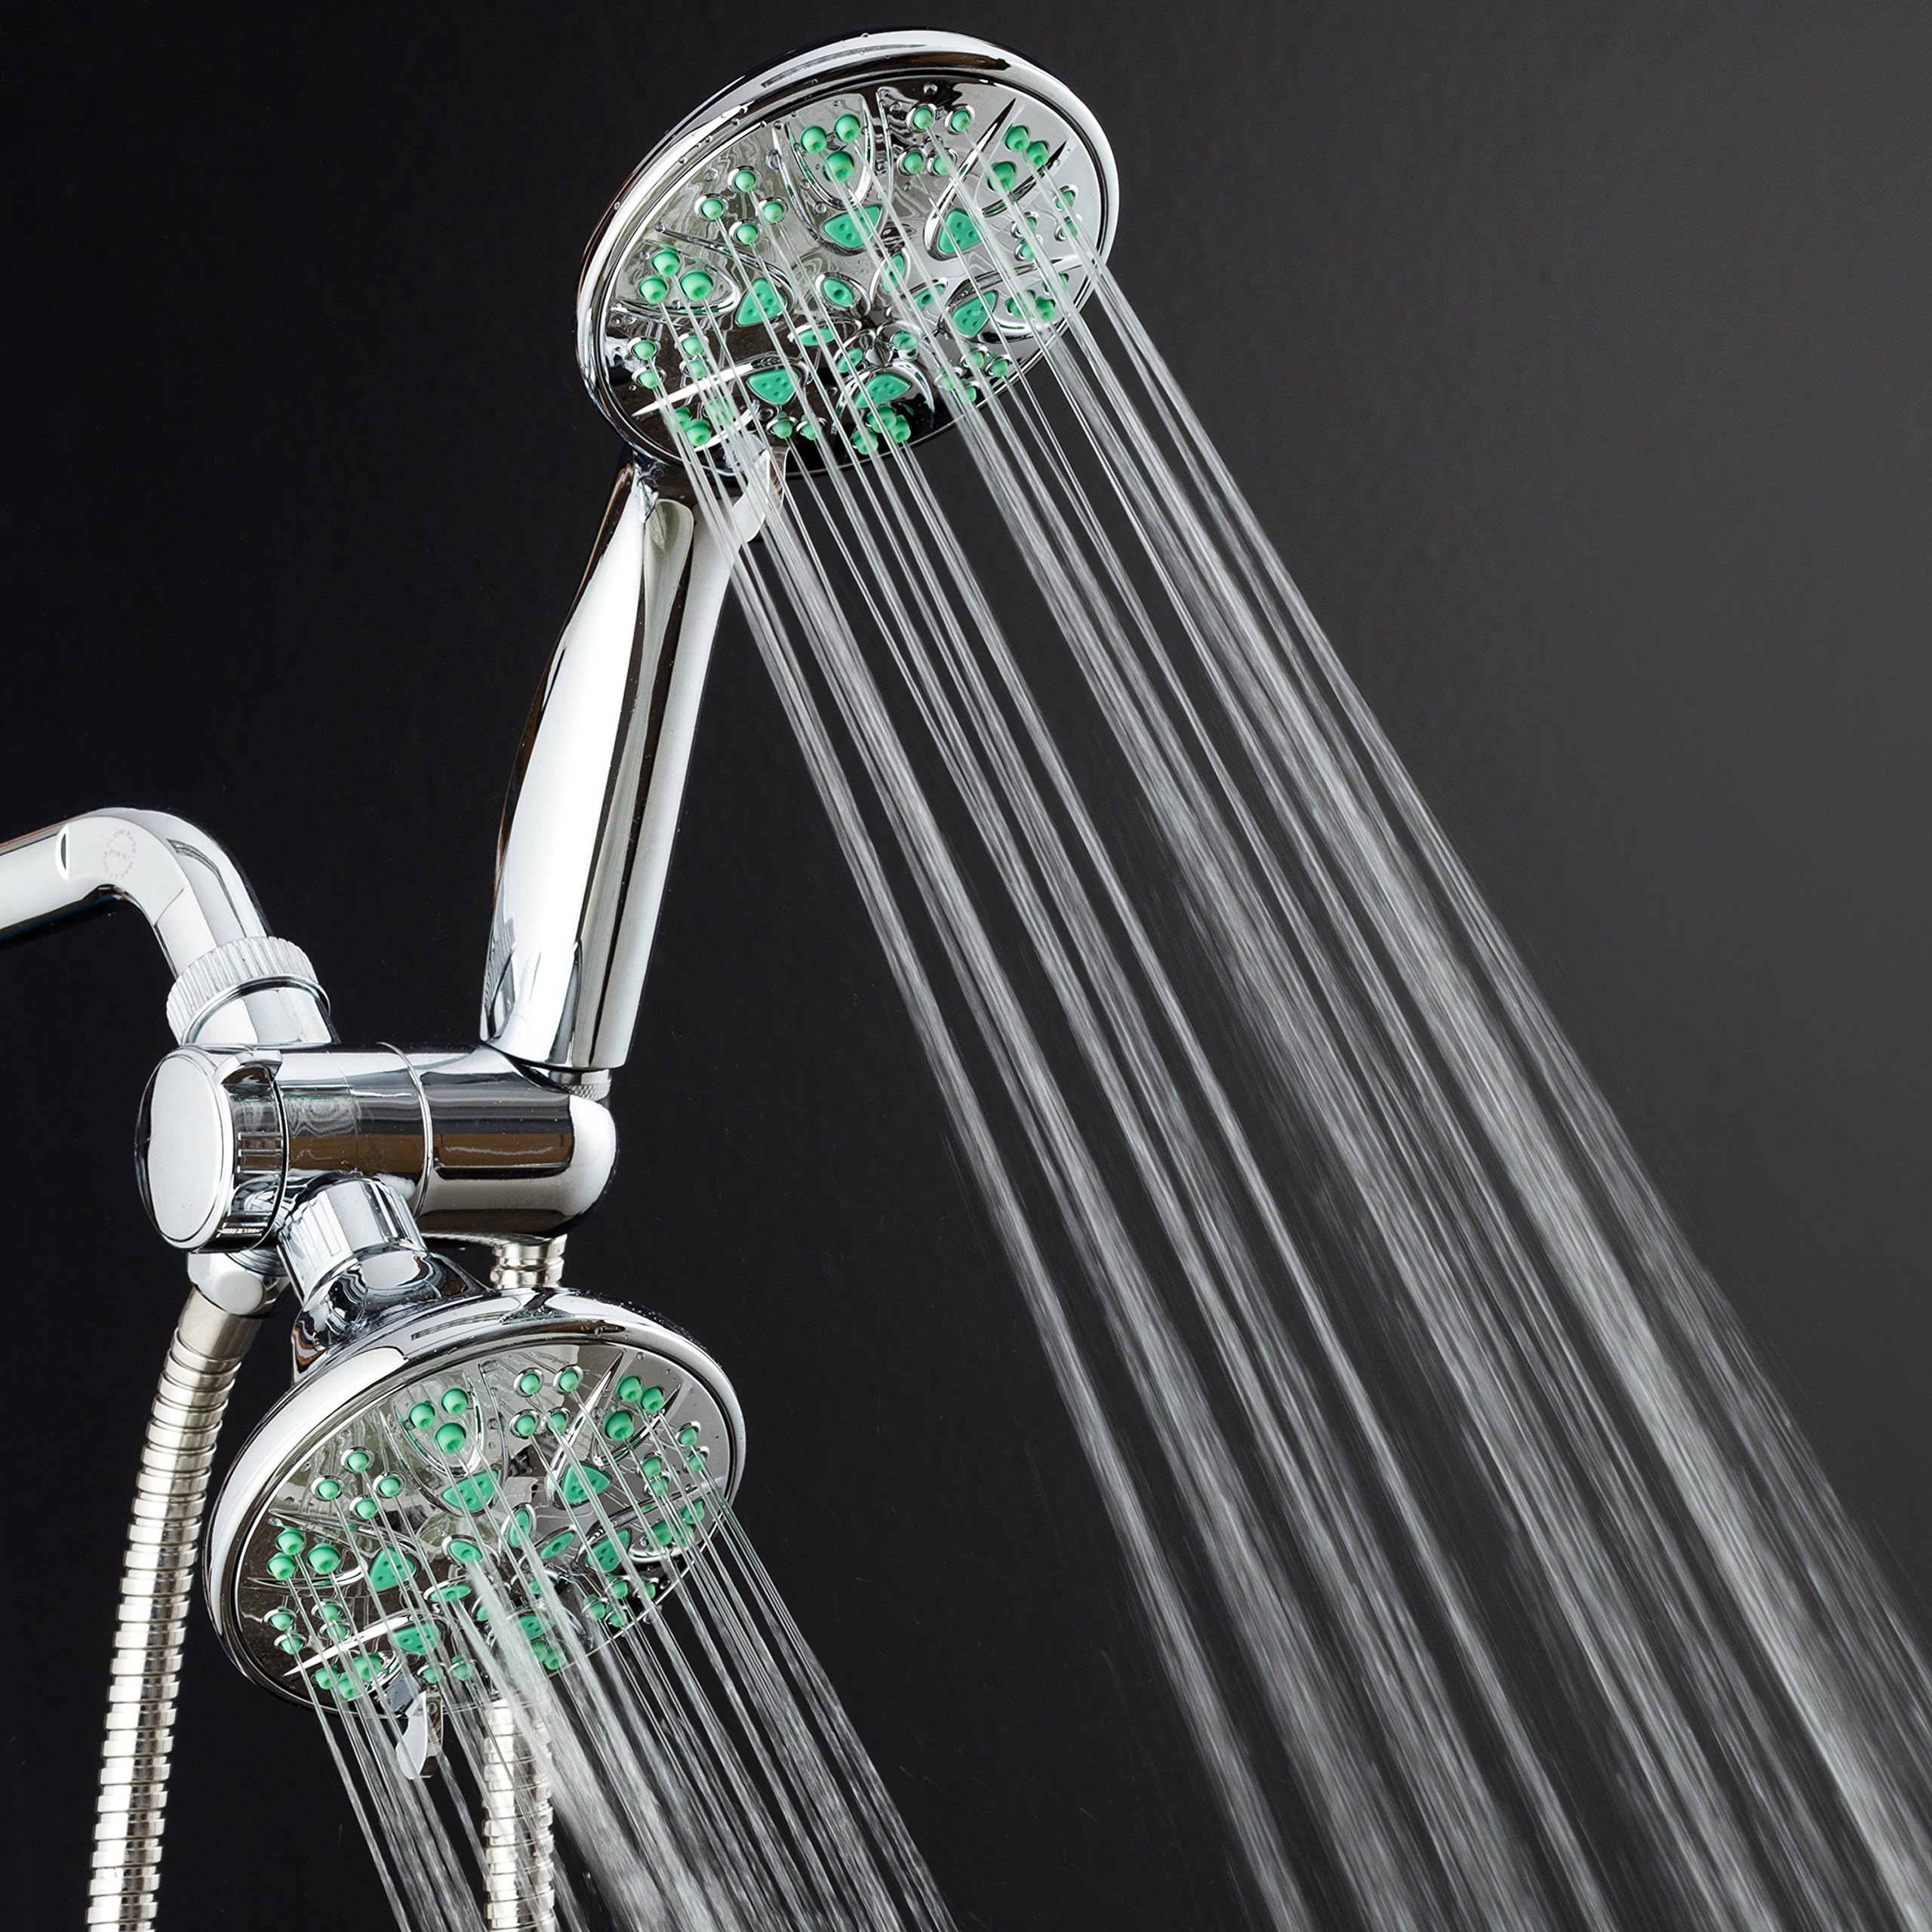 Antimicrobial/Anti-Clog High-Pressure 30-setting Dual Head Combination Shower by AquaDance with Microban Nozzle Protection From Growth of Mold, Mildew & Bacteria for a Healthier Shower– Coral Green